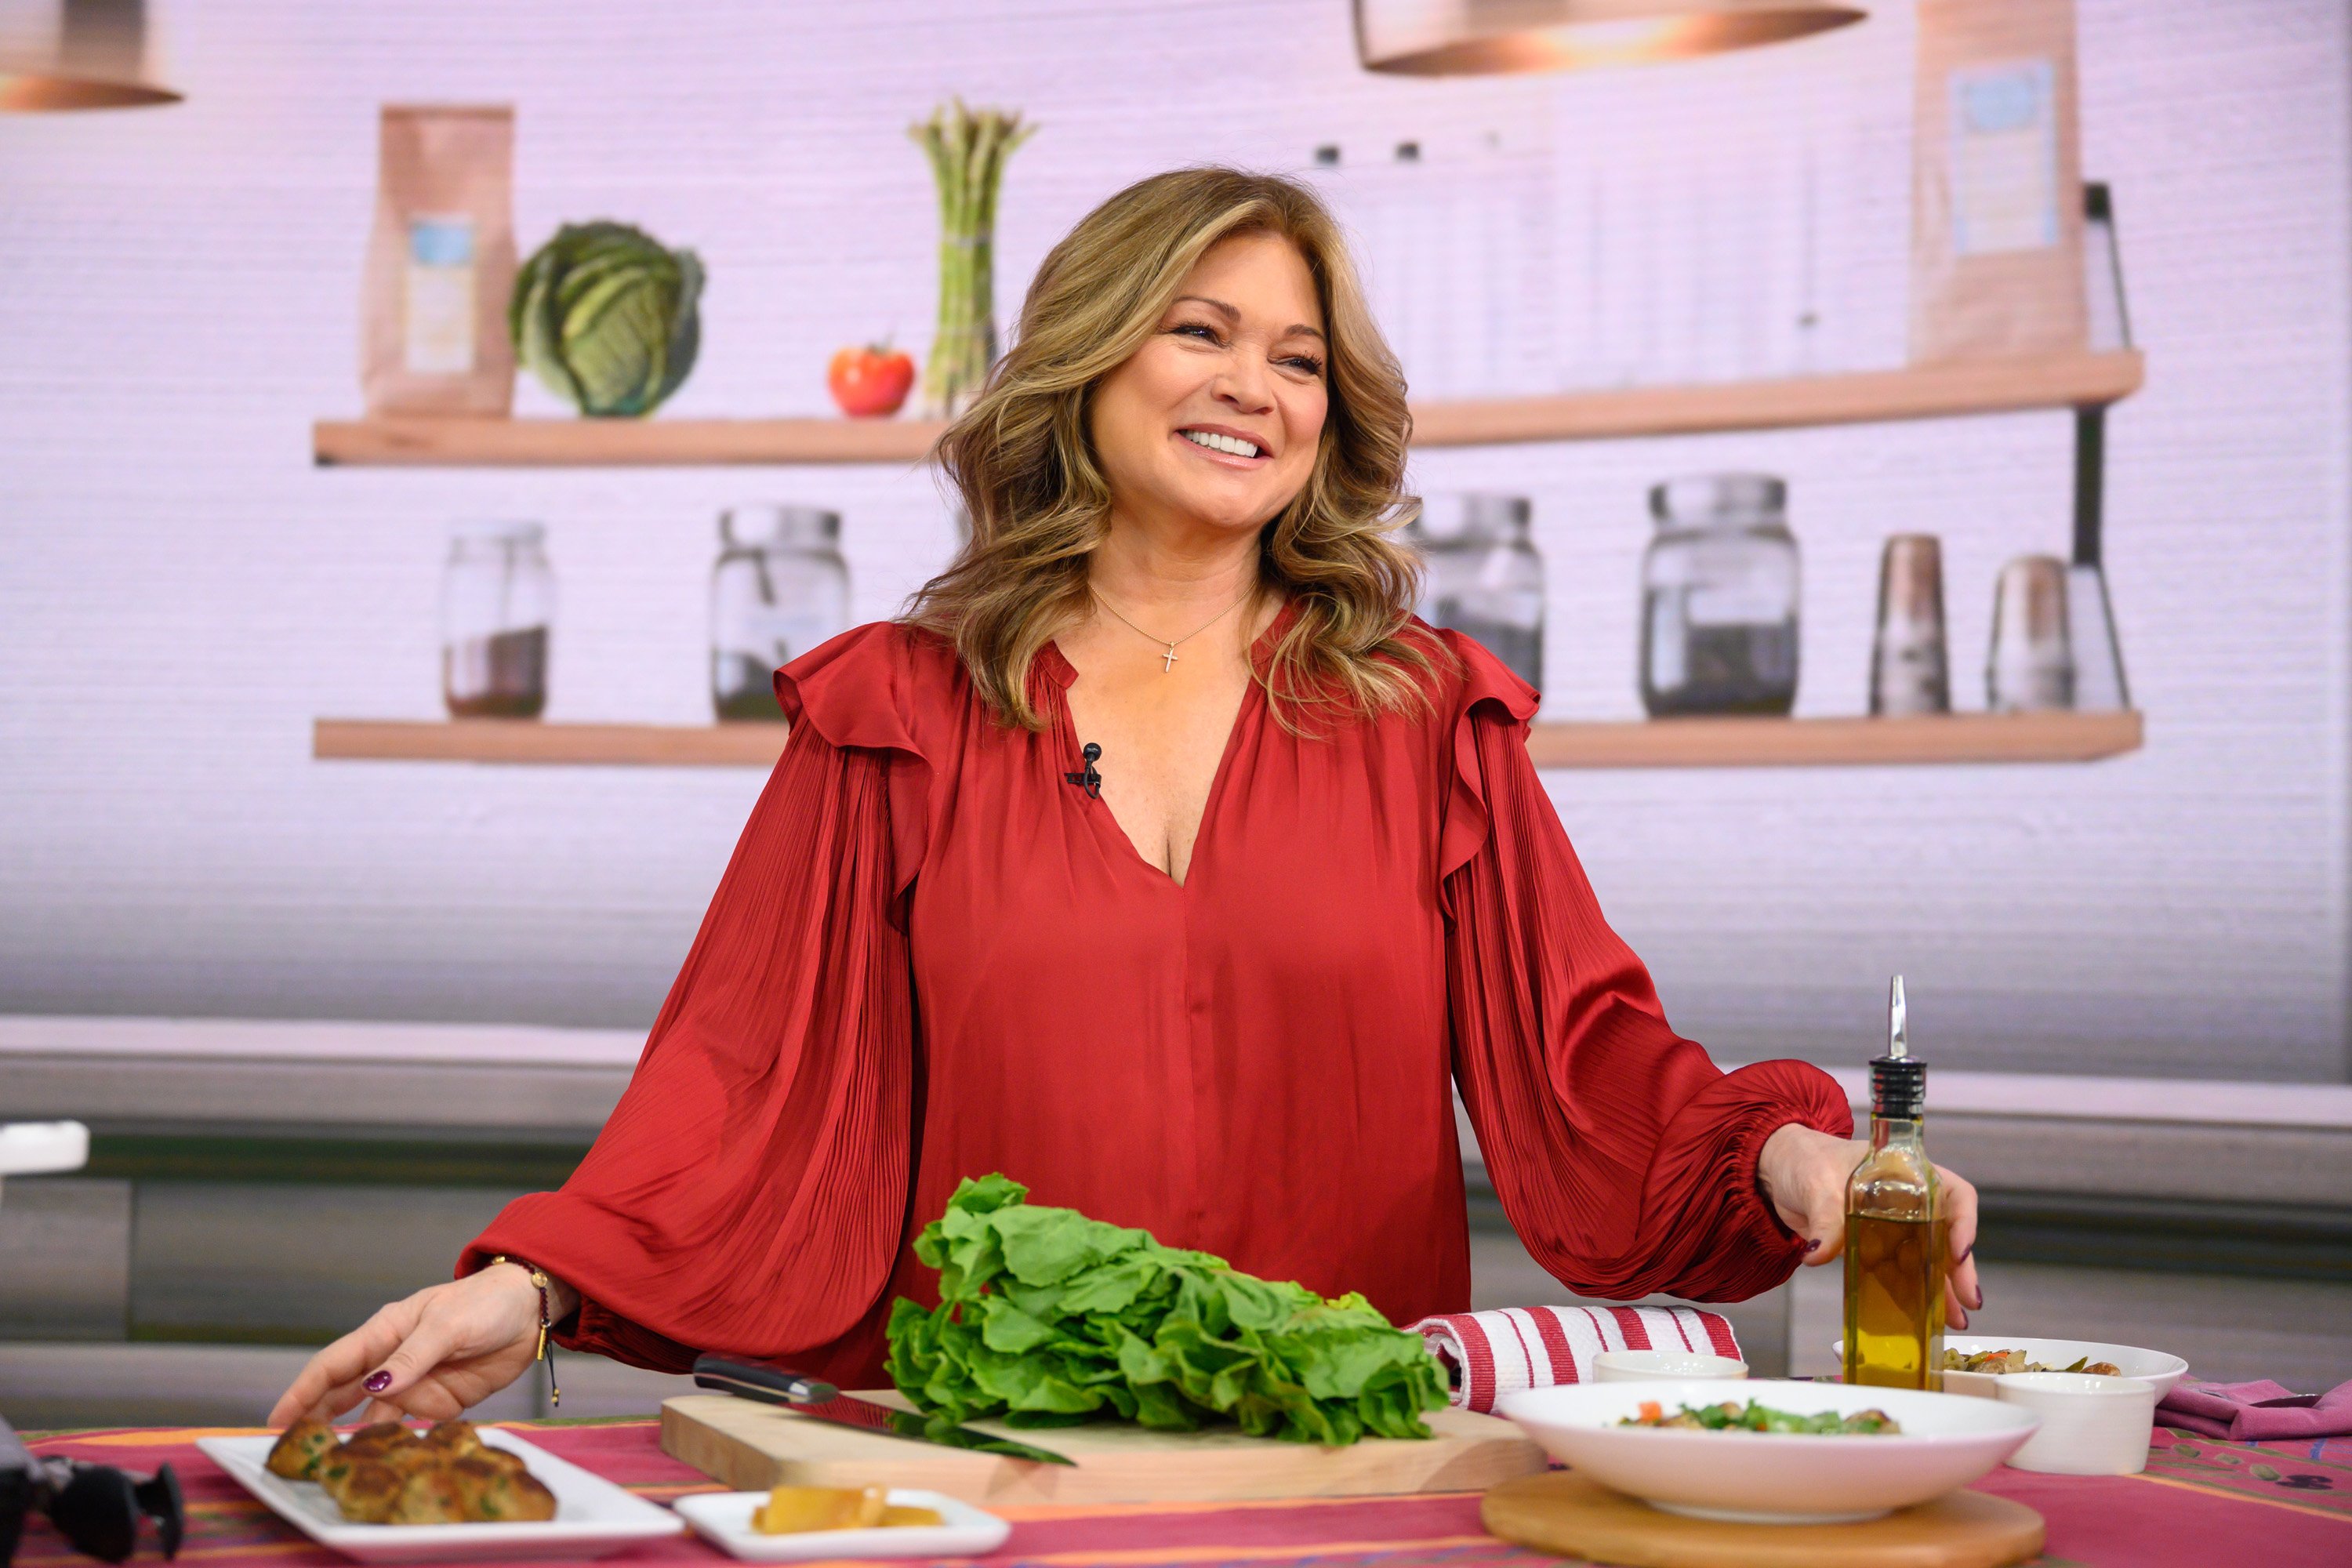 Food Network host Valerie Bertinelli in the 'Today Show' kitchens.